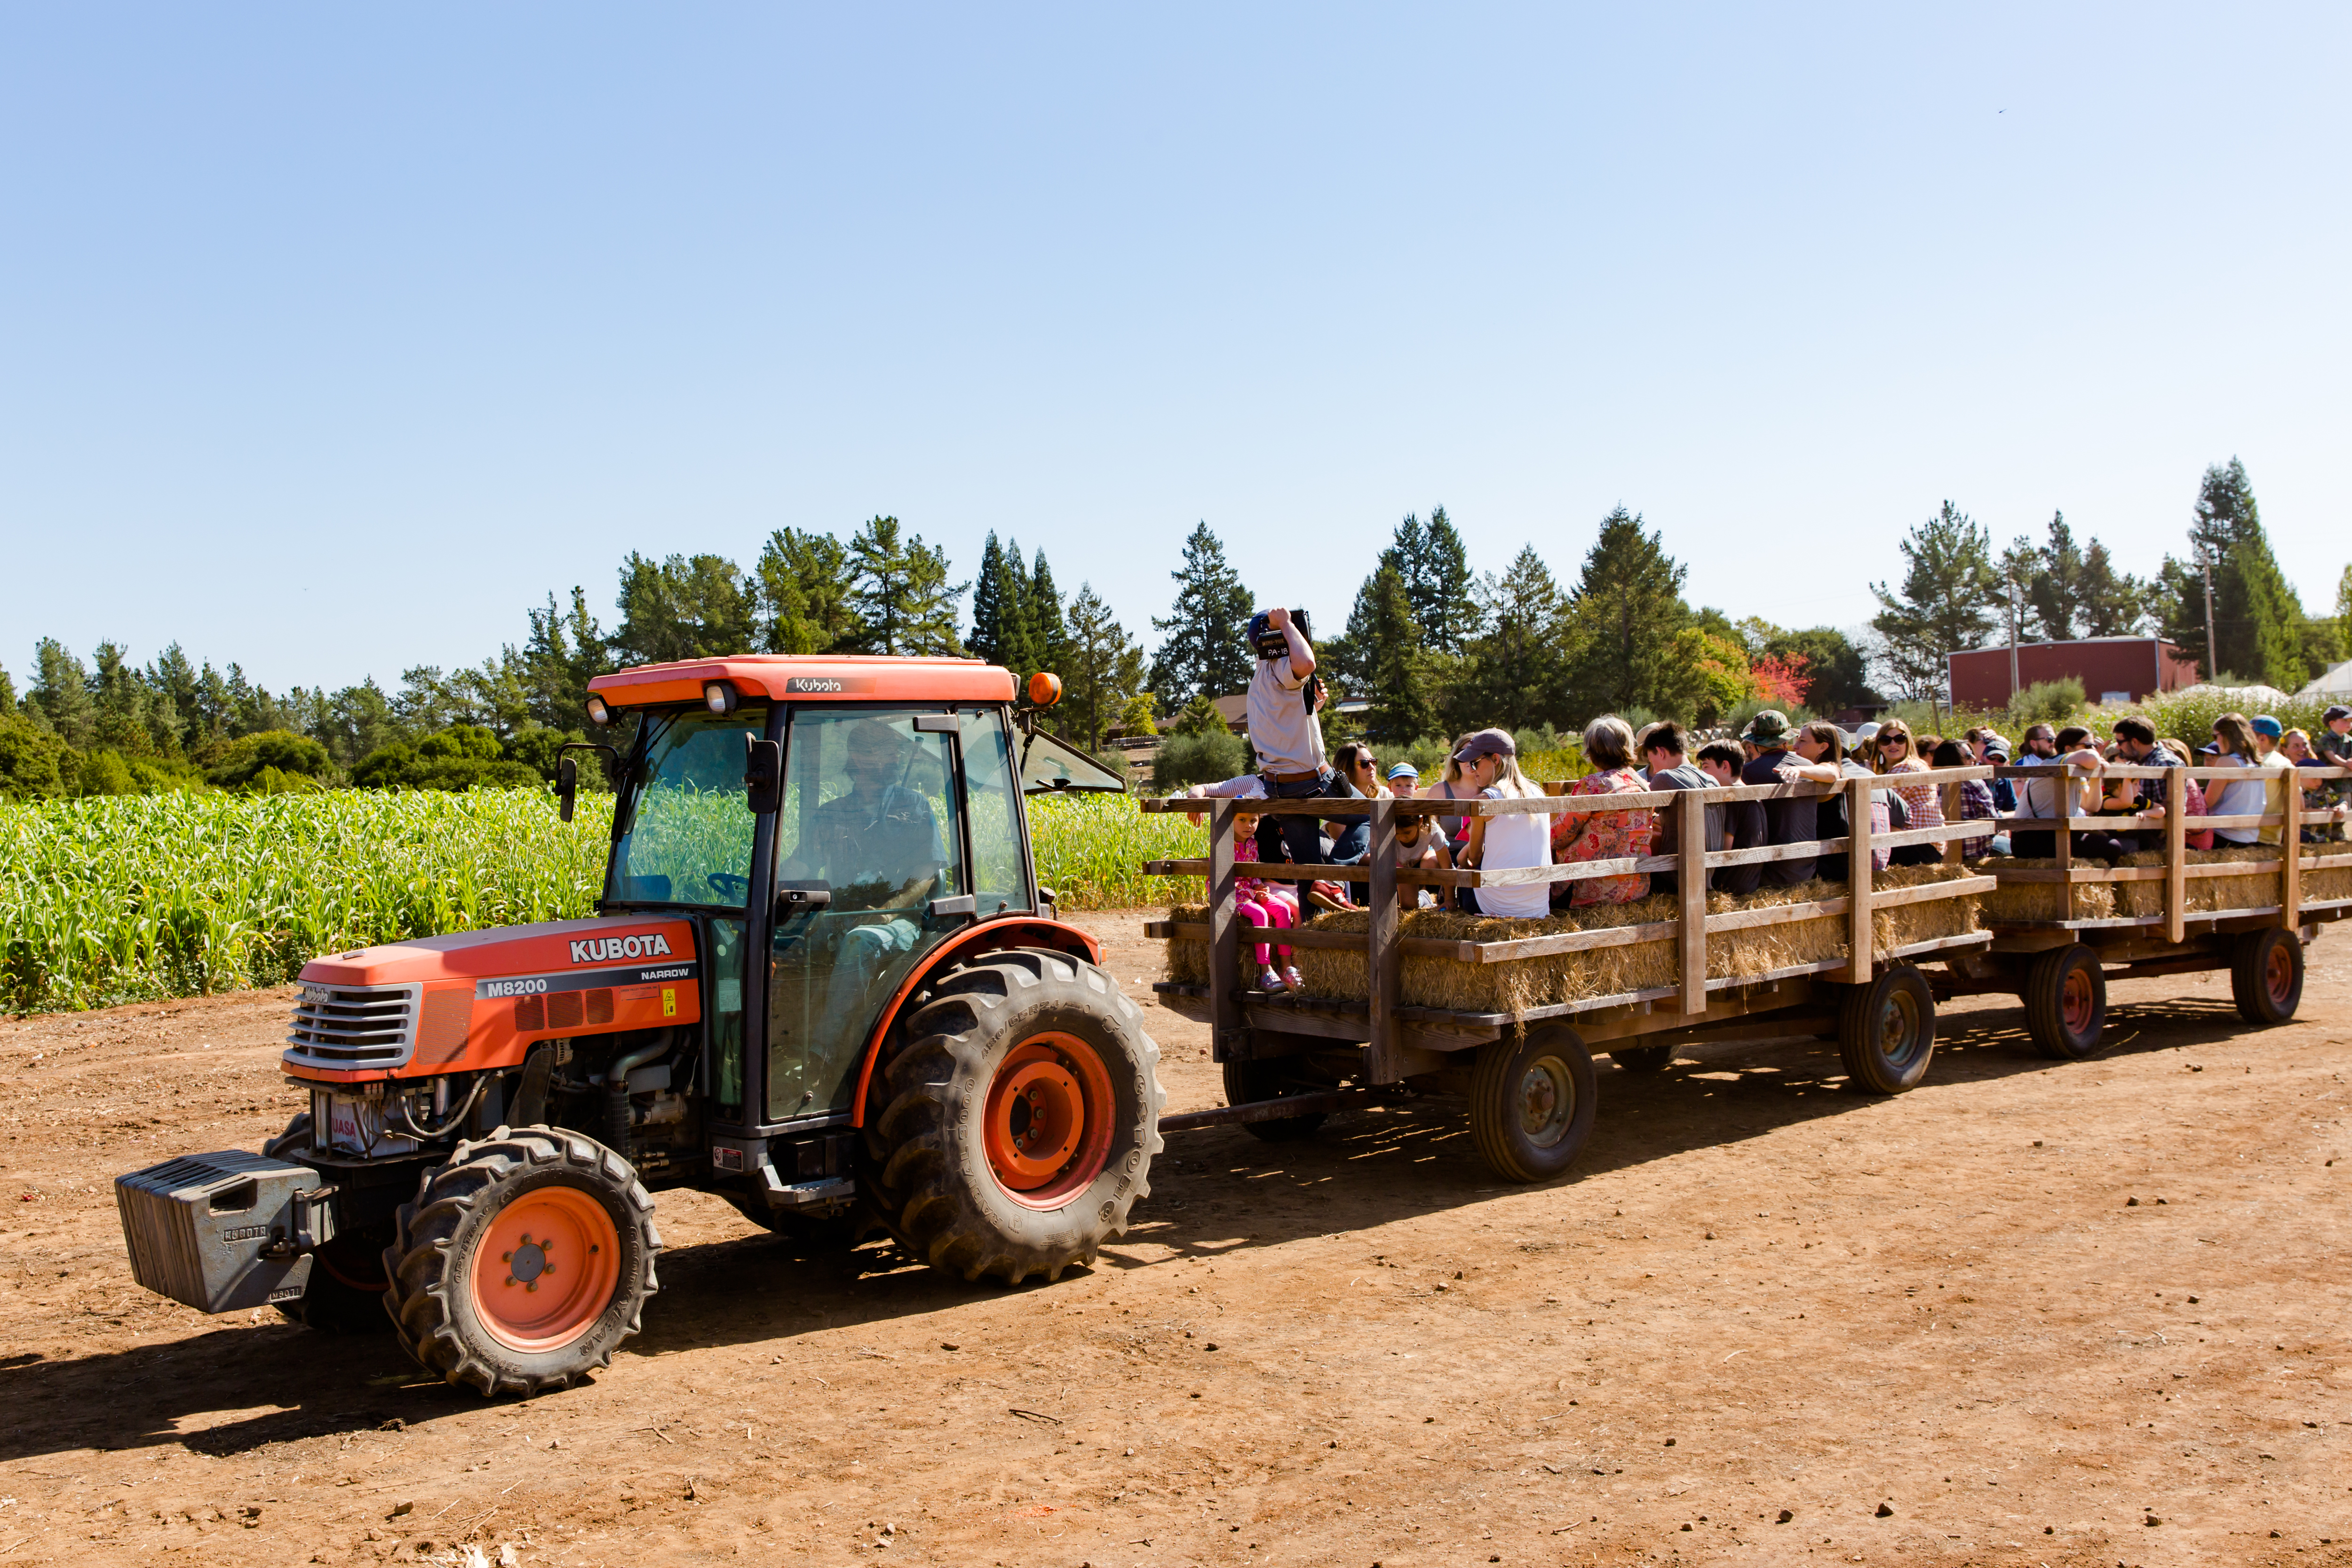 A small orange tractor drives down a dirt road, towing two partially enclosed flatbed wagons loaded with Fall Fest visitors seated on hay bales.